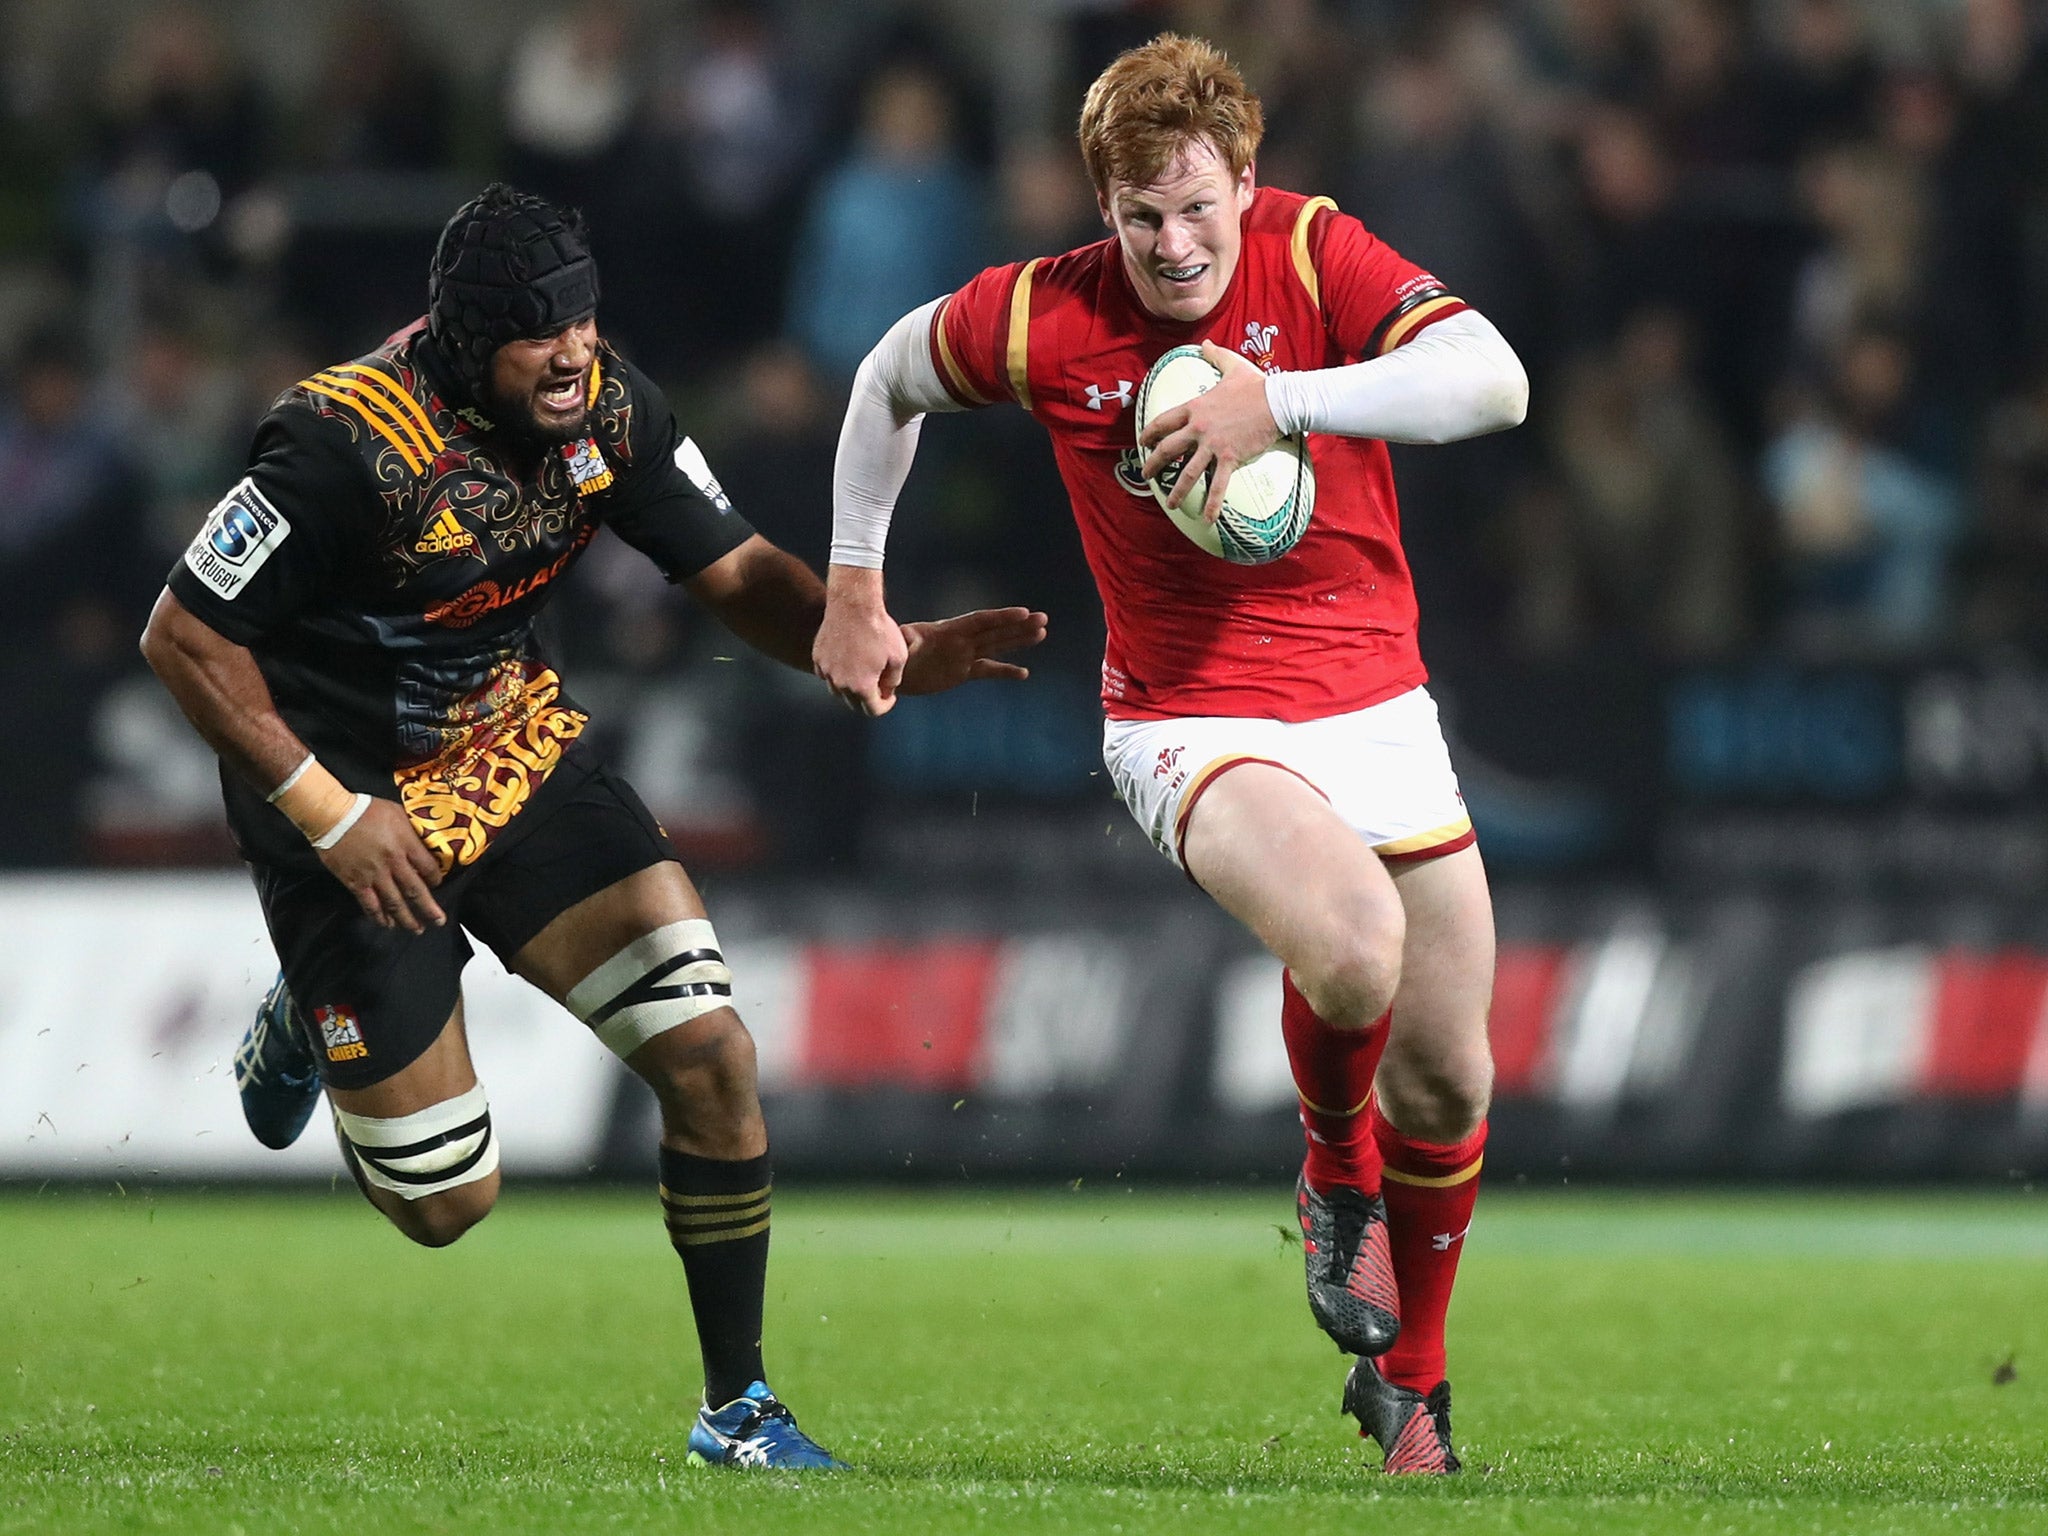 Rhys Patchell starts at full-back with Liam Williams switching to the wing